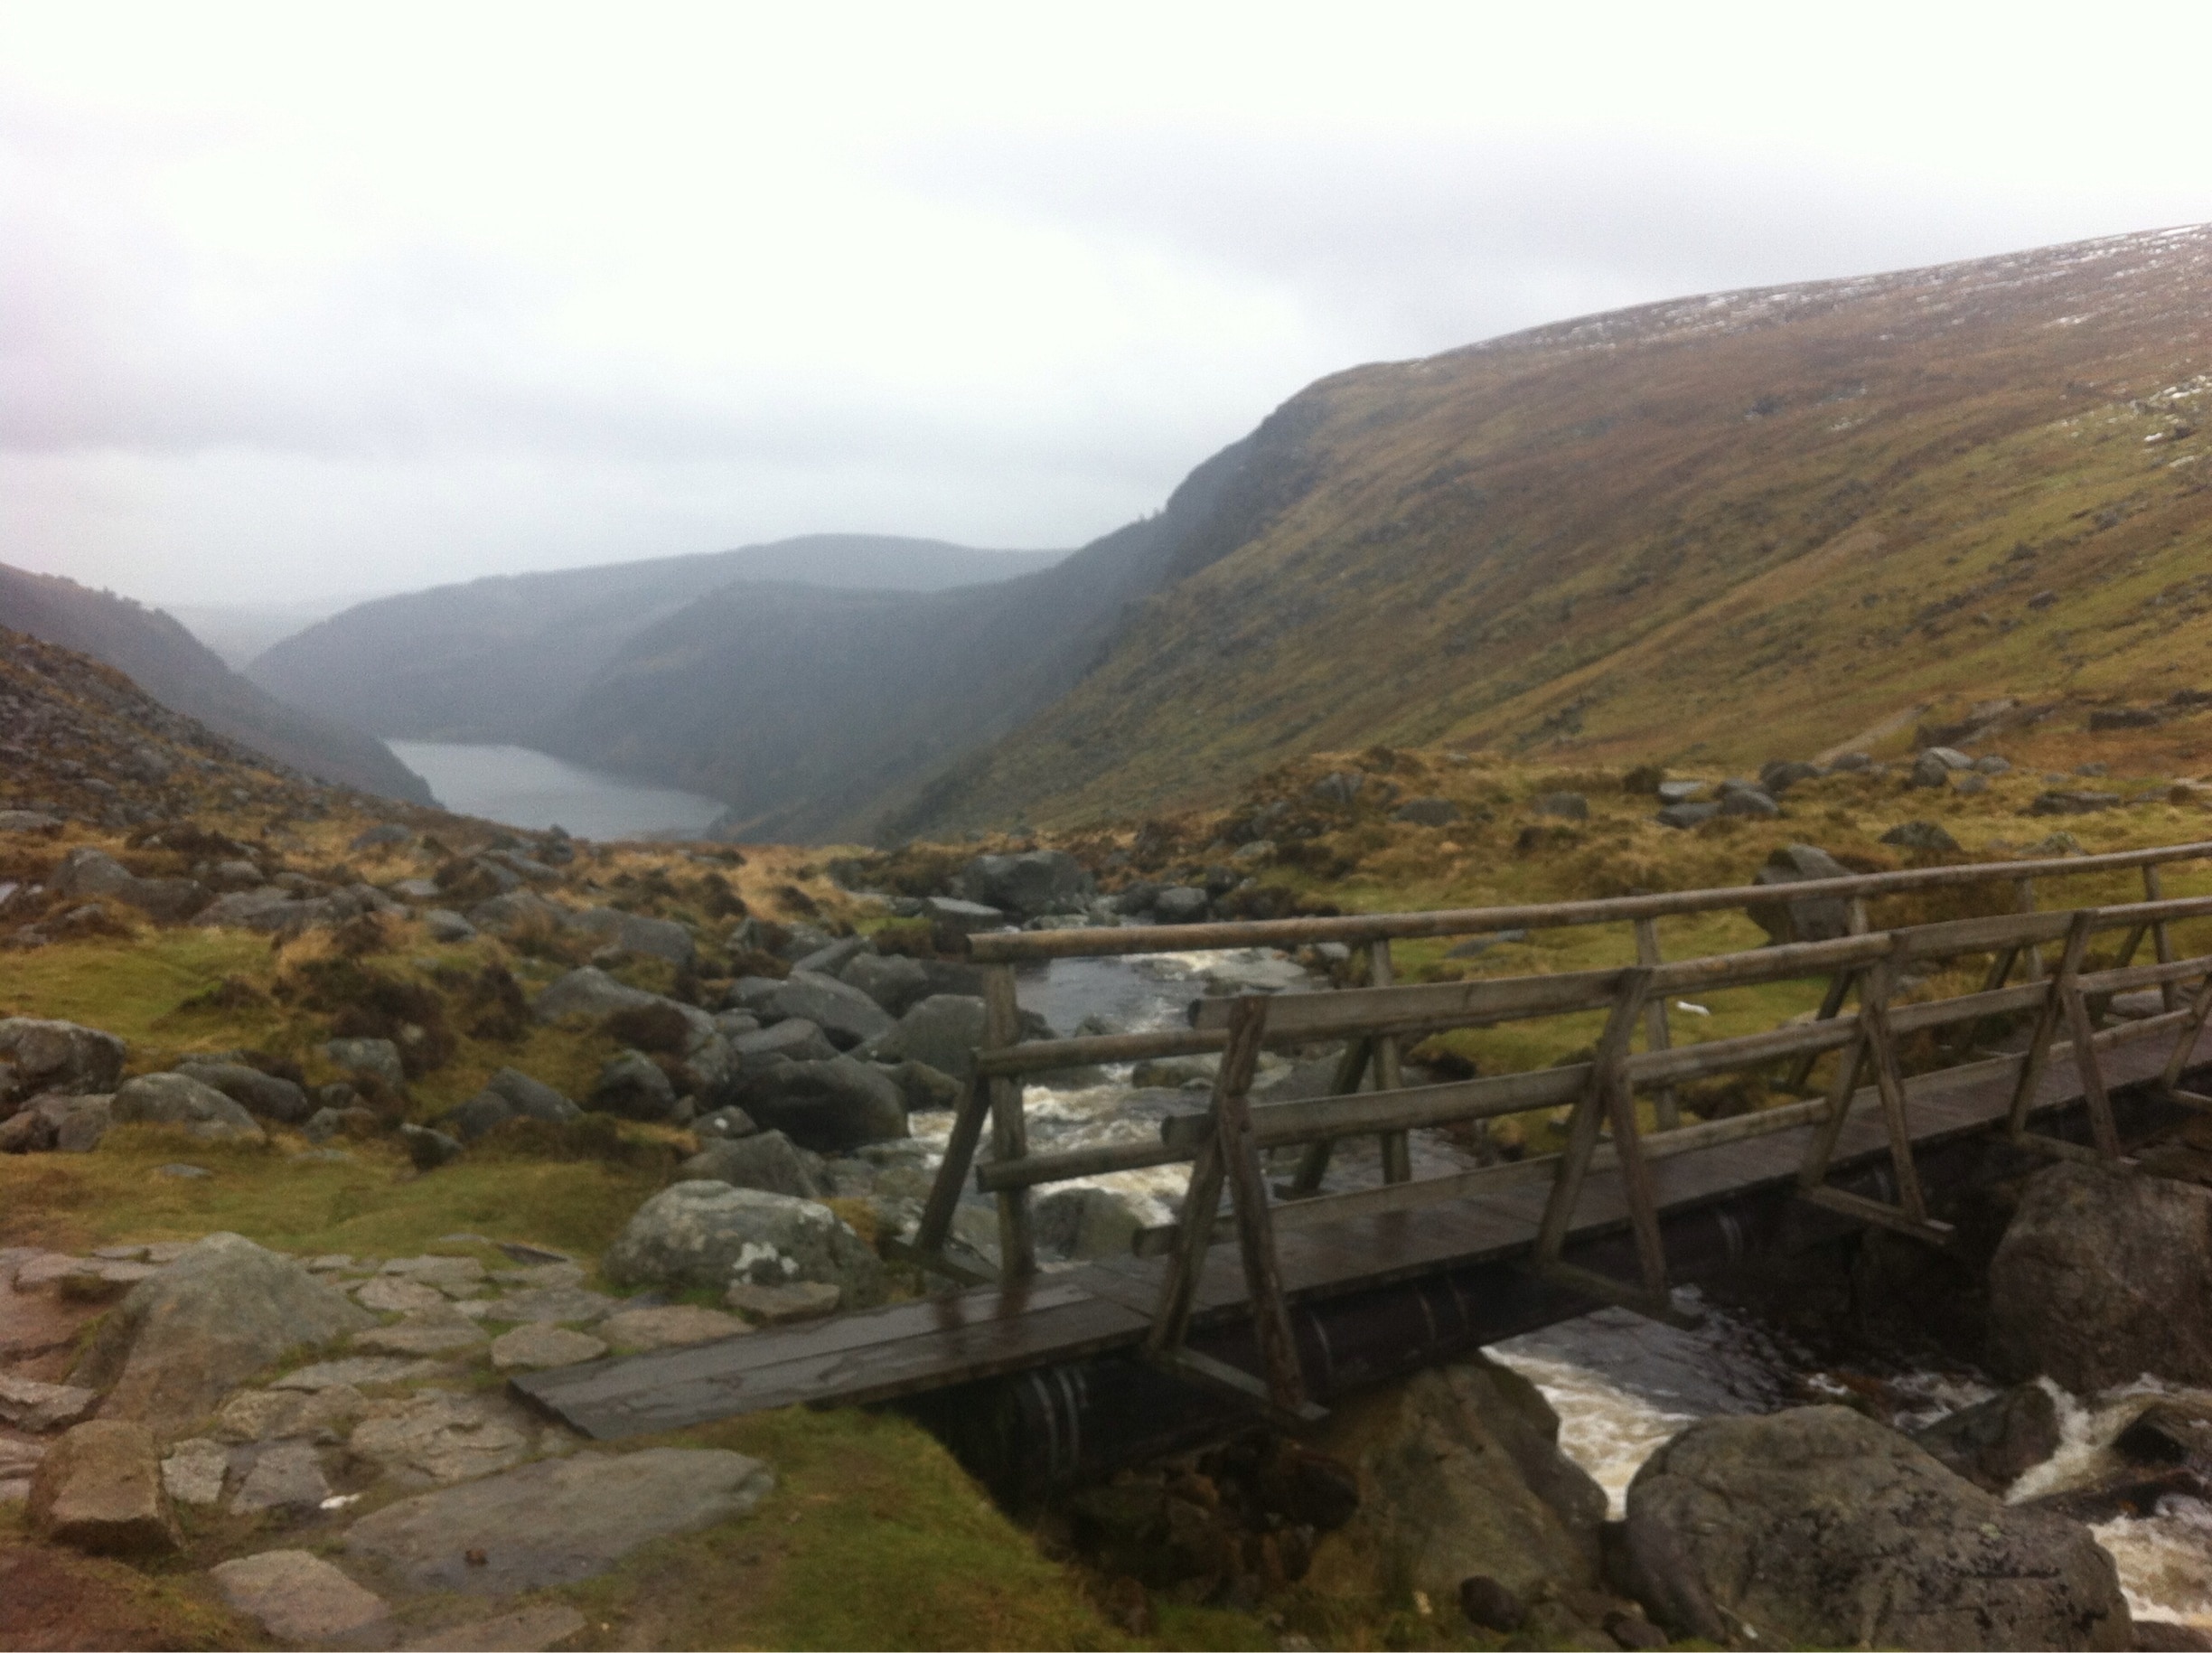 A cold winter hike in Wicklow, this is part of a 2hr+ loop in Glendalough. It was quite mystical. 